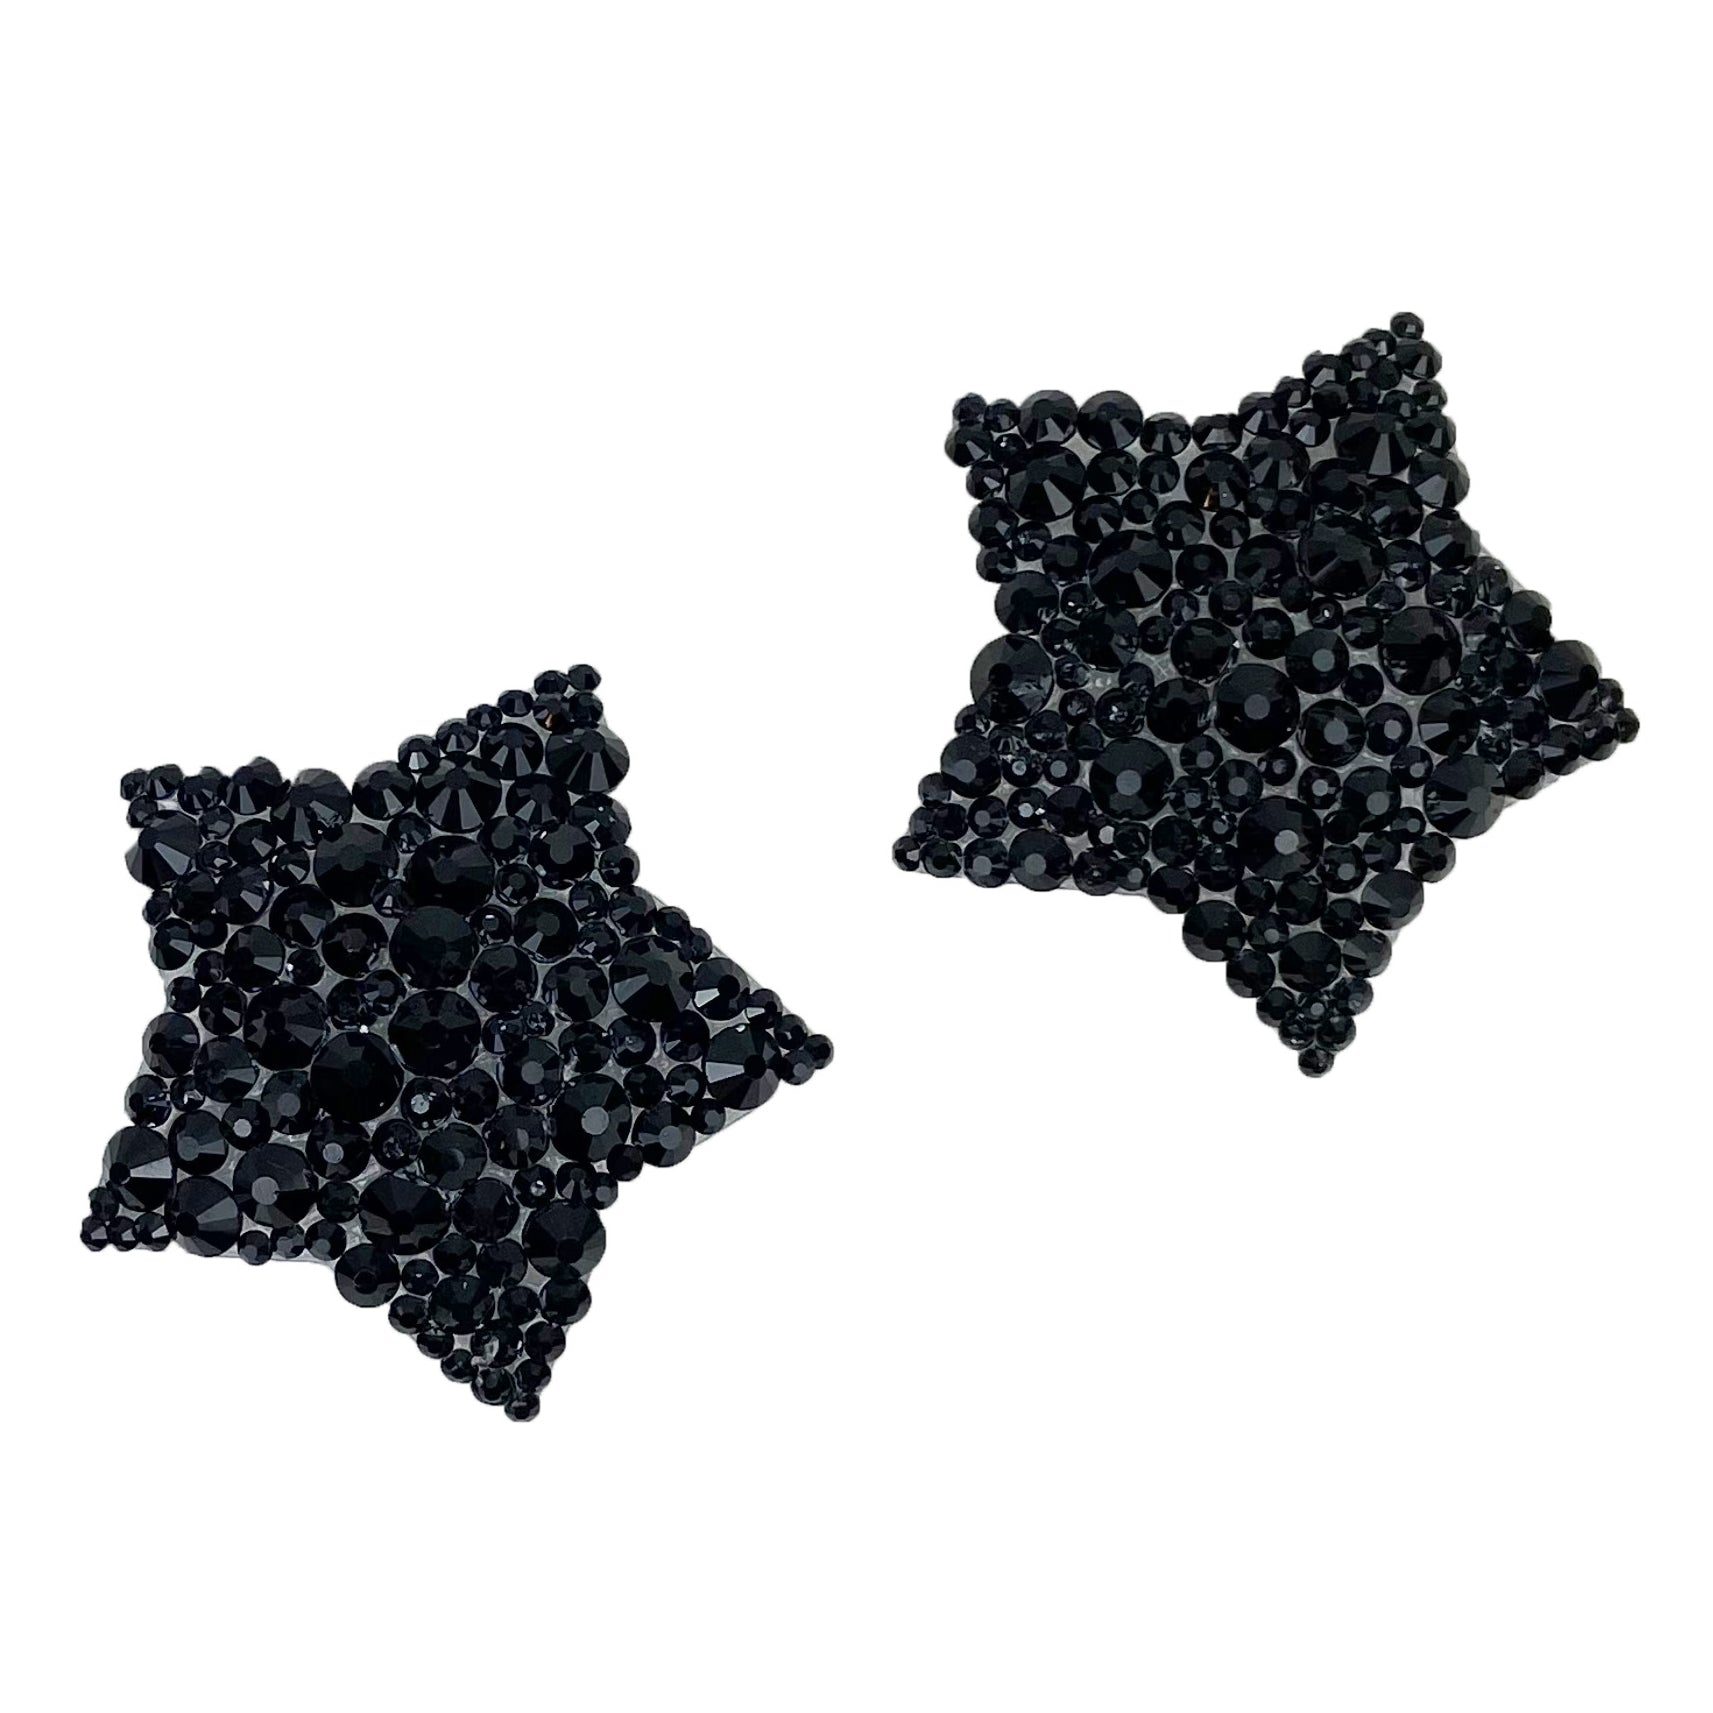 black star pasties, burlesque costume, 3d printed, crystals